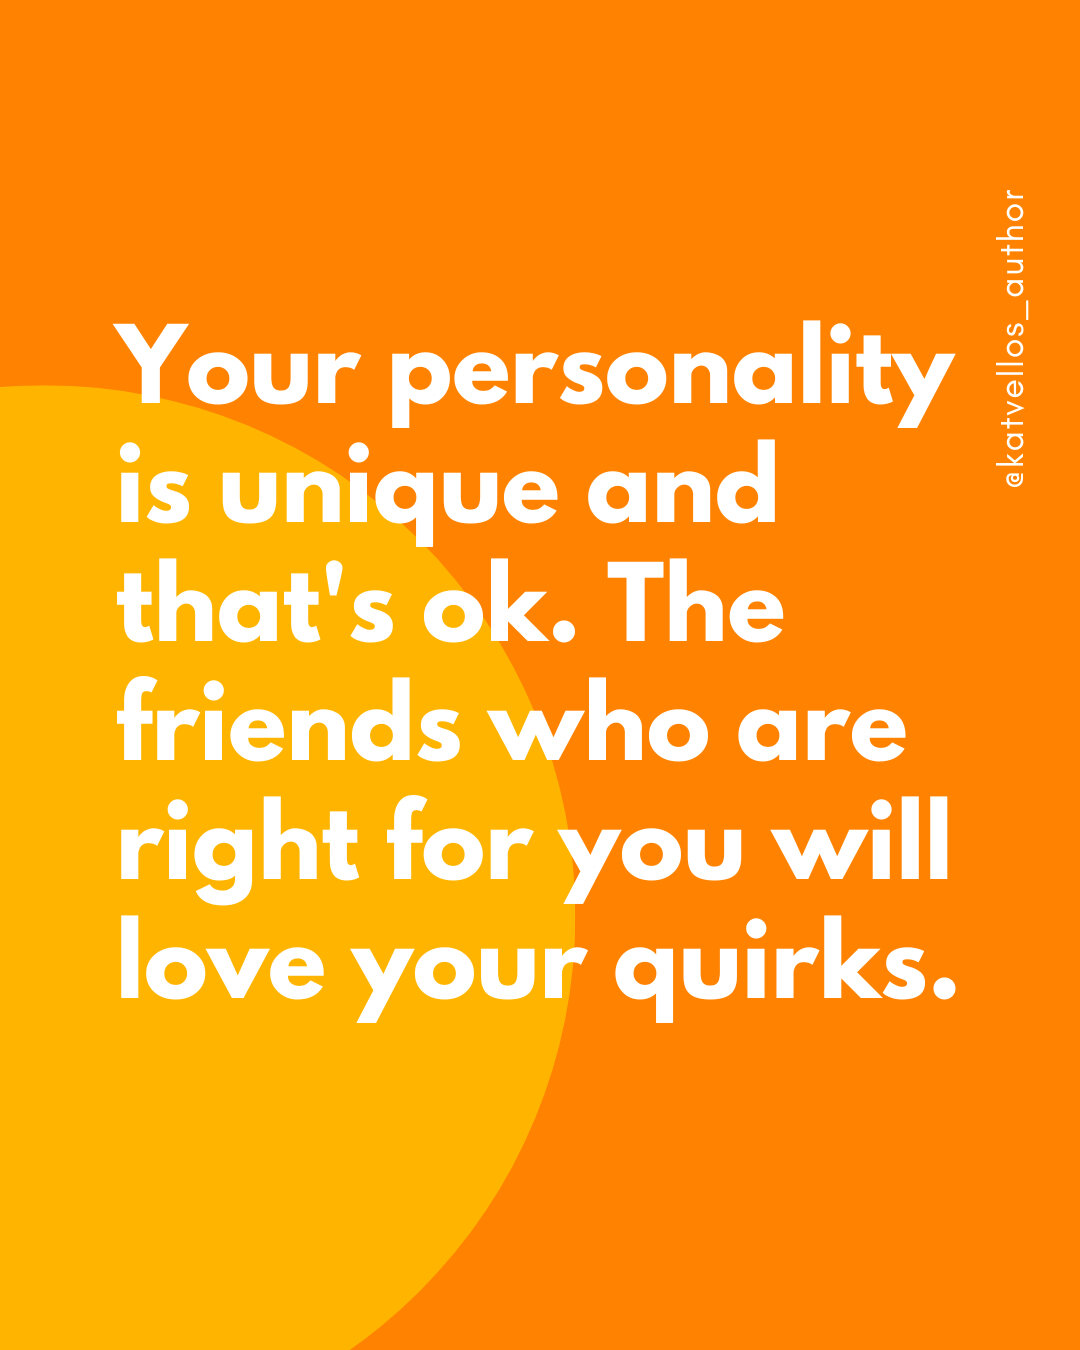 Today's affirmation: &quot;Your personality is unique and that's ok. The friends who are right for you will love your quirks.&quot; ❤️⁣
If you want to be welcomed for your wonderfully weird and quirky self, get a ticket now for my platonic matchmakin